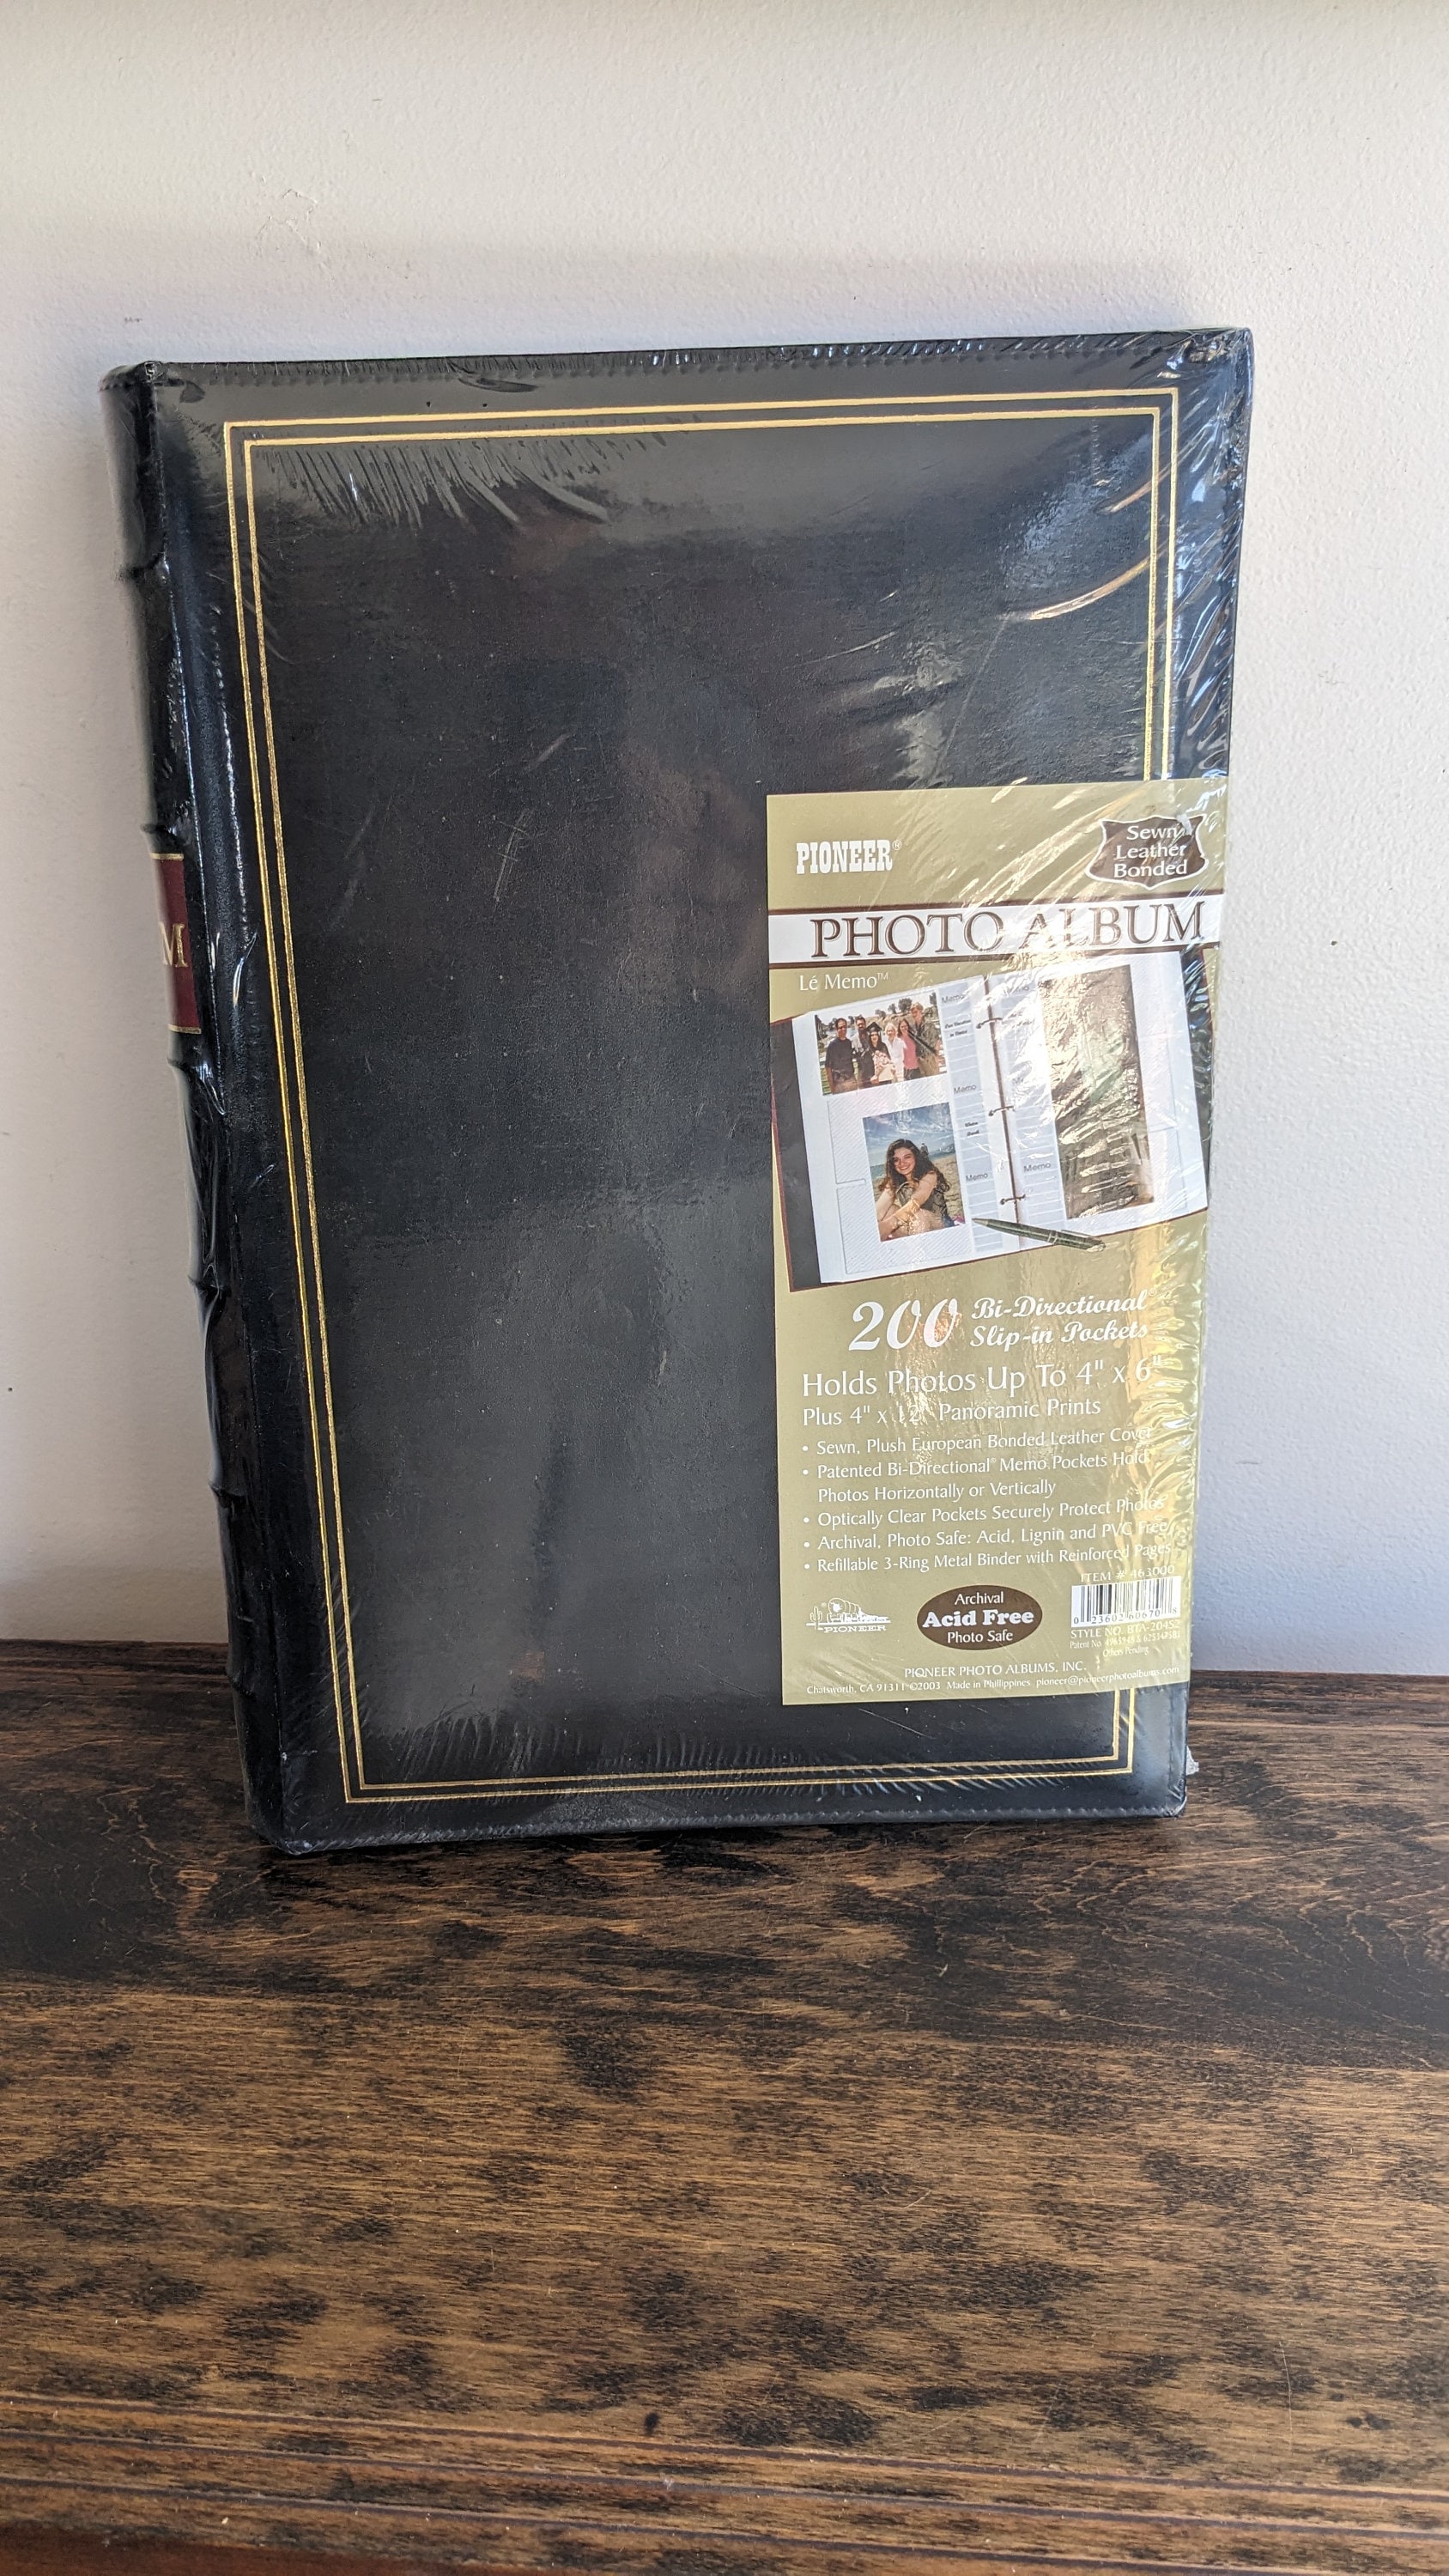 Large Photo Album With Window 500 4x6 Pockets 13.75x13.5 Powder Blue With  Gold Stamping 